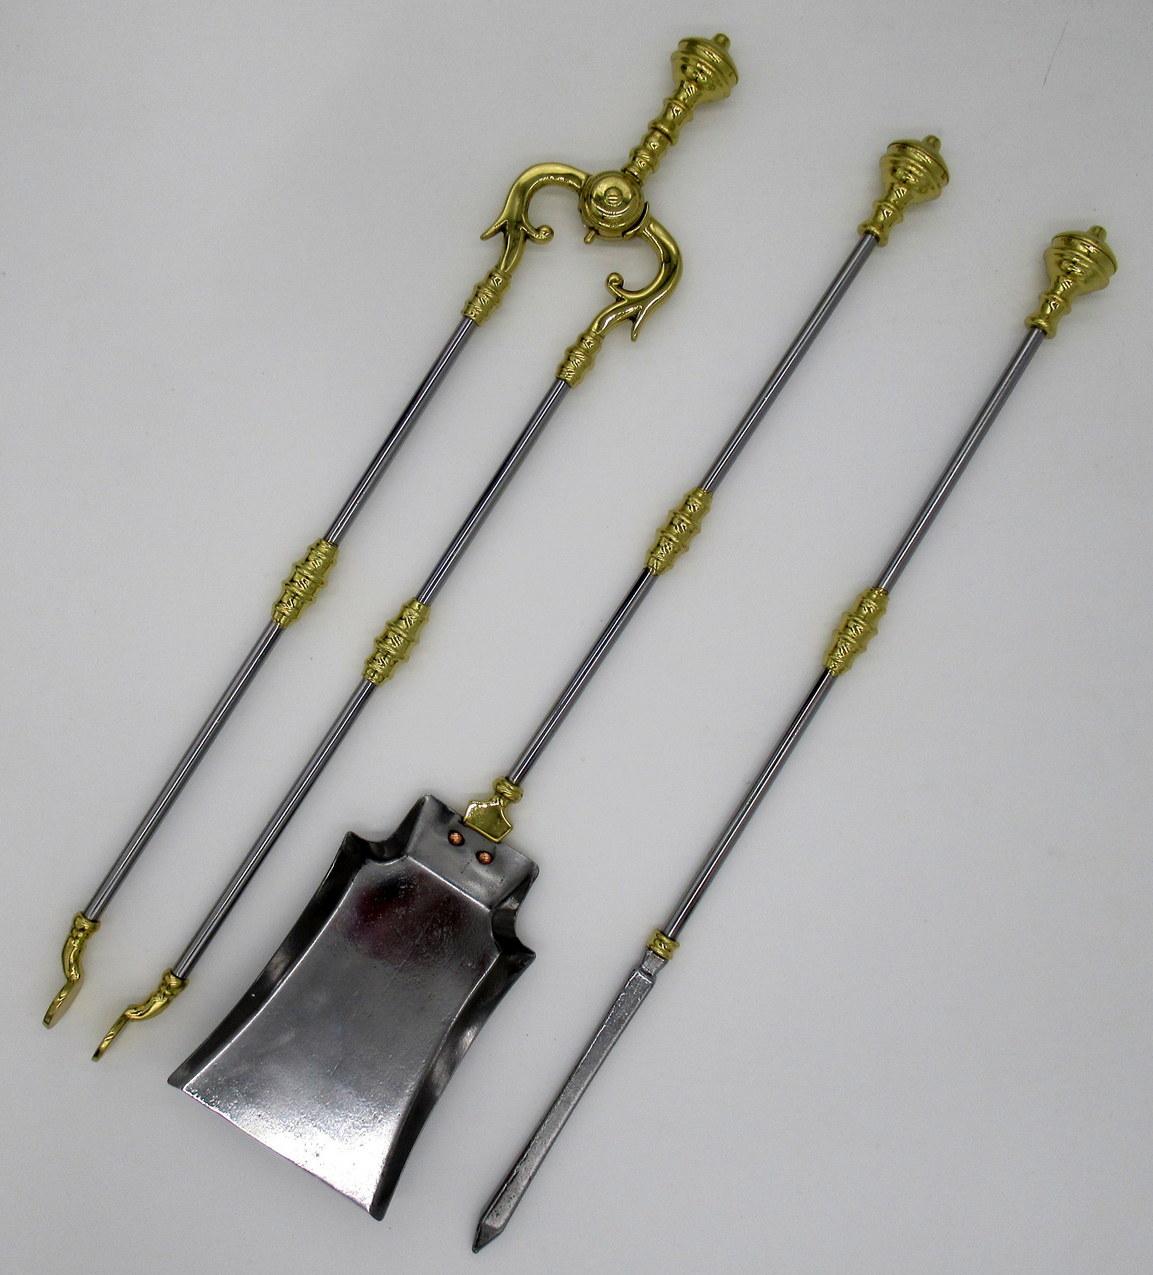 A very fine original set of early english victorian polished steel and brass fireplace fire tools of outstanding workmanship and quality. Mid Nineteenth Century. Circa 1860 

Comprising a poker, tongs and a plain flair tipped shovel all with